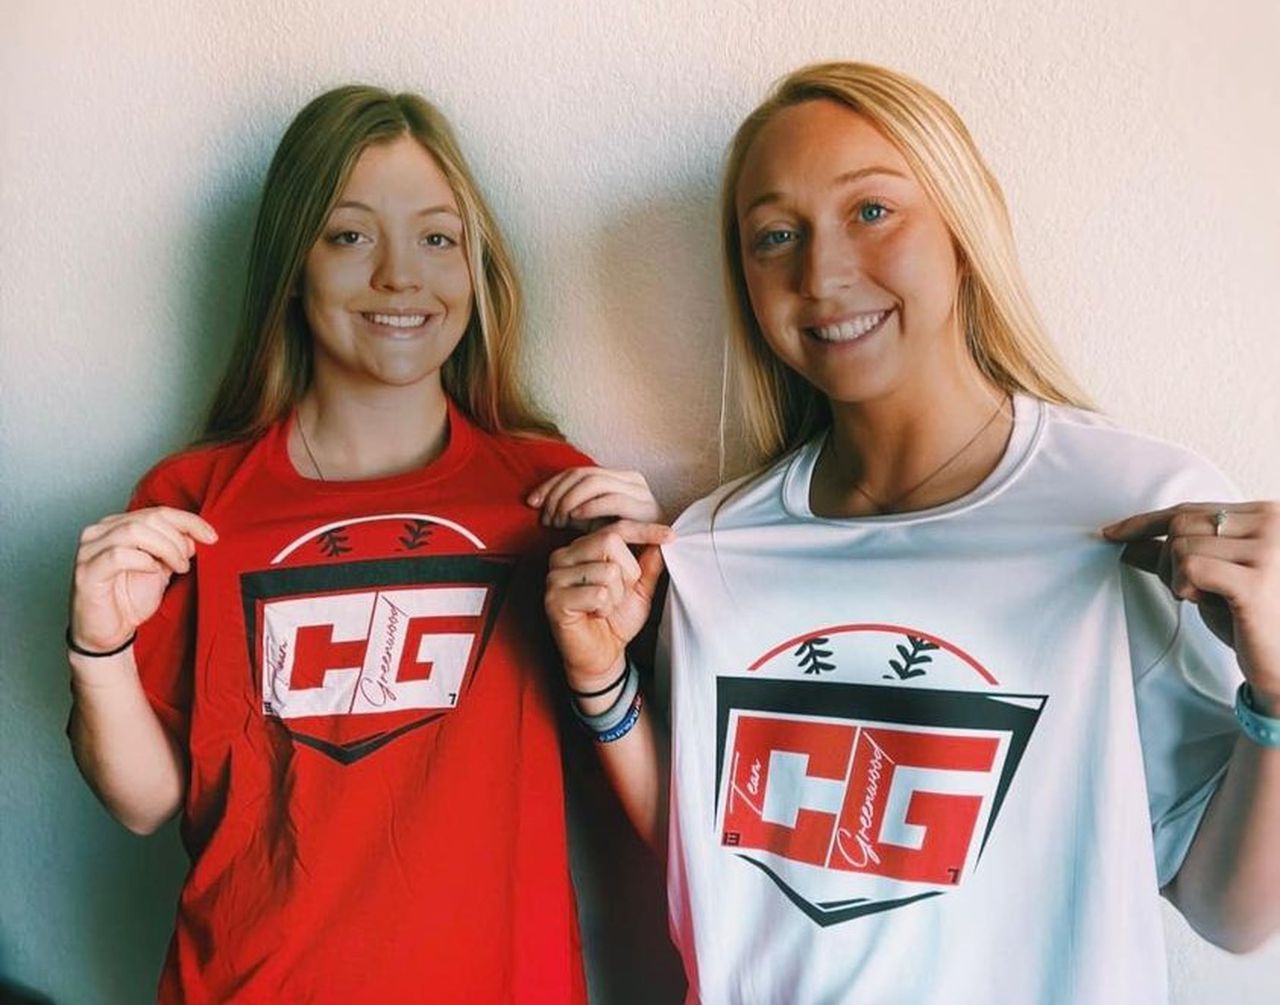 How Sisters Give Back To the Community During Their Final Softball Season Together